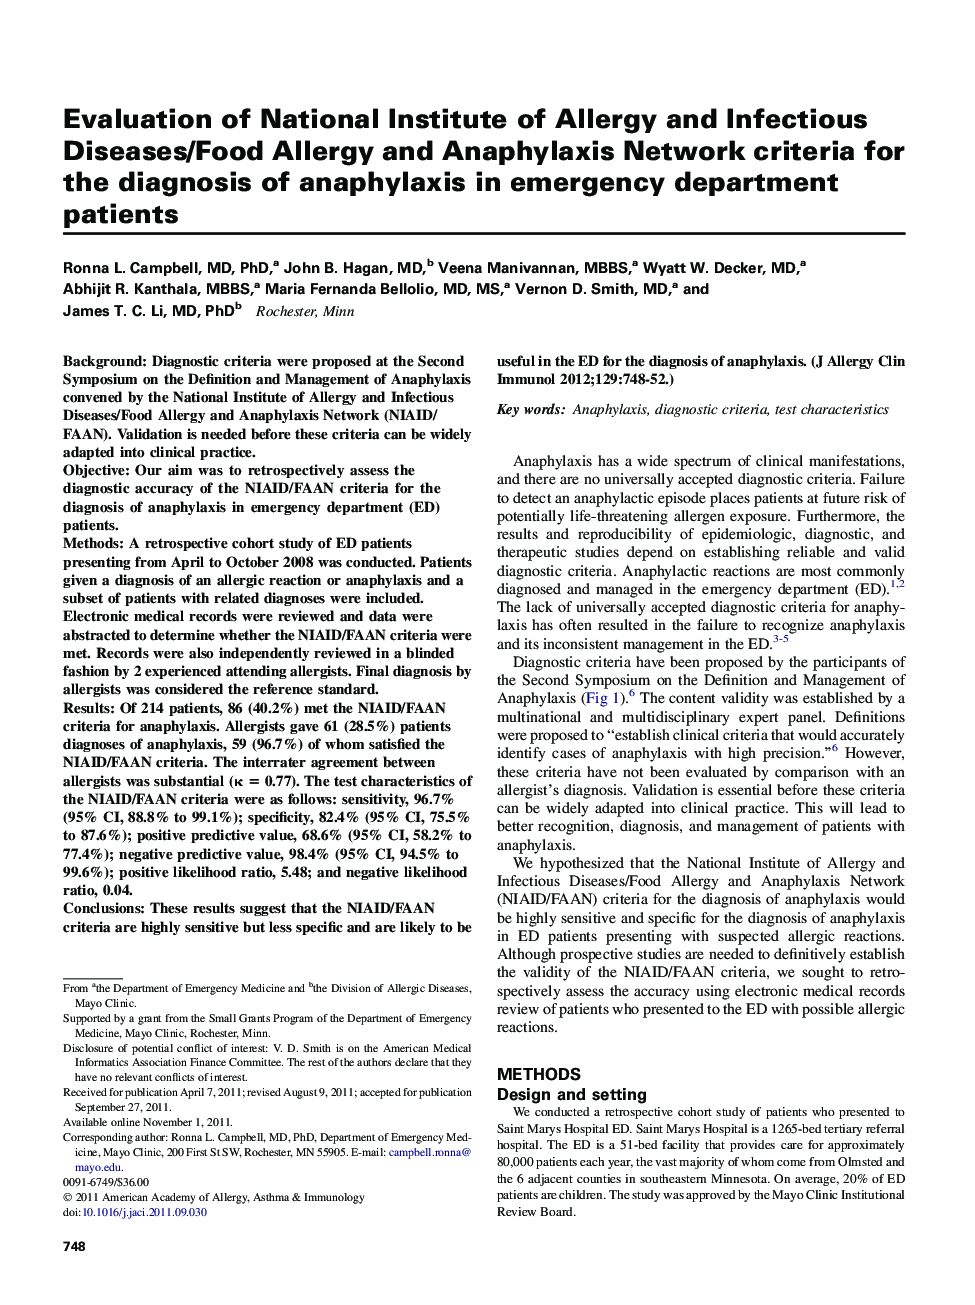 Evaluation of National Institute of Allergy and Infectious Diseases/Food Allergy and Anaphylaxis Network criteria for the diagnosis of anaphylaxis in emergency department patients 